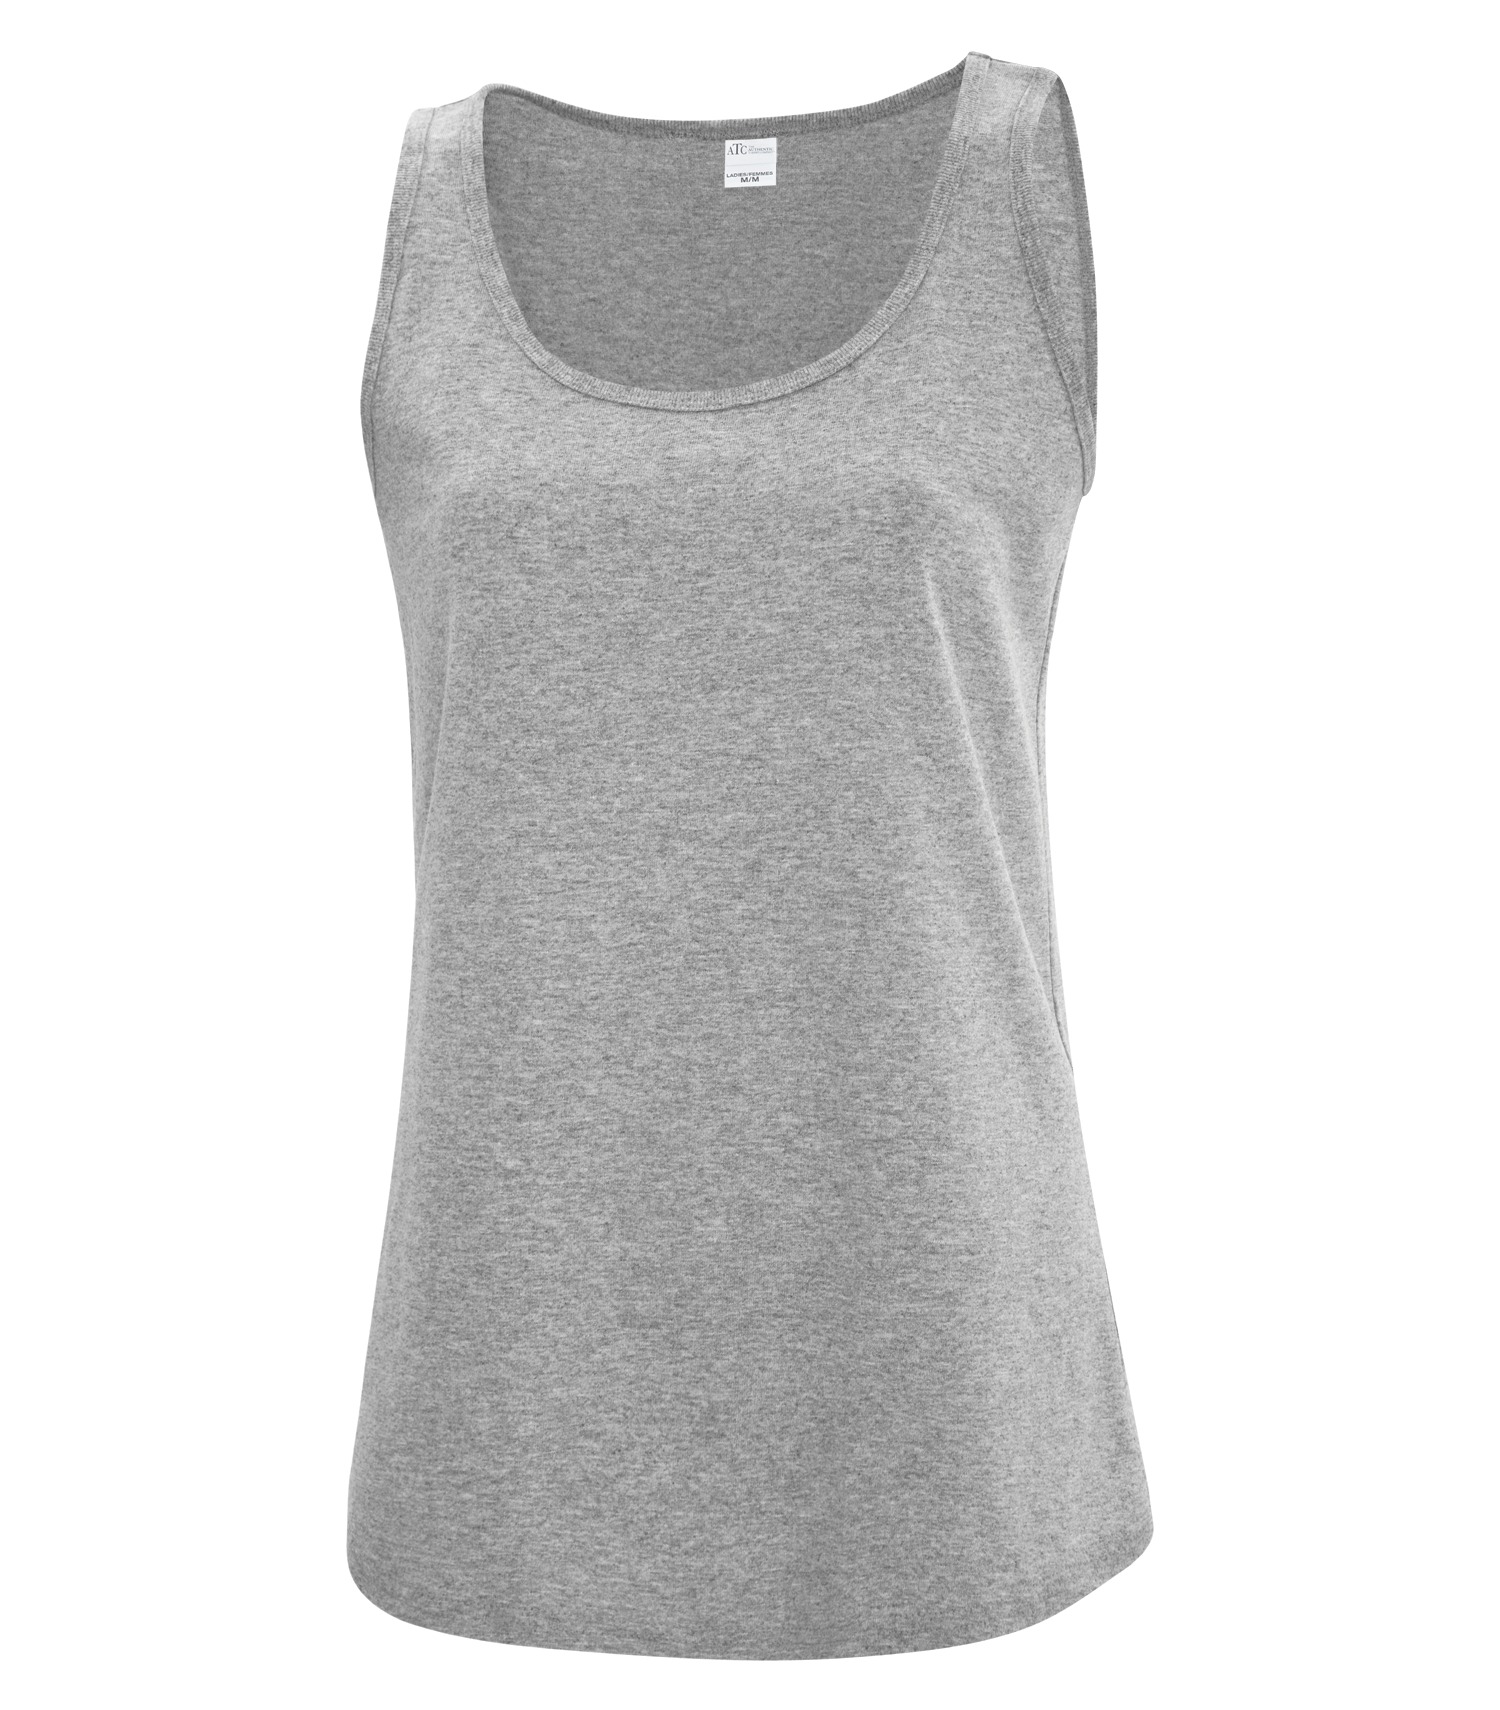 ATC 1004L EVERYDAY COTTON LADIES' TANK TOP - Great West Graphics